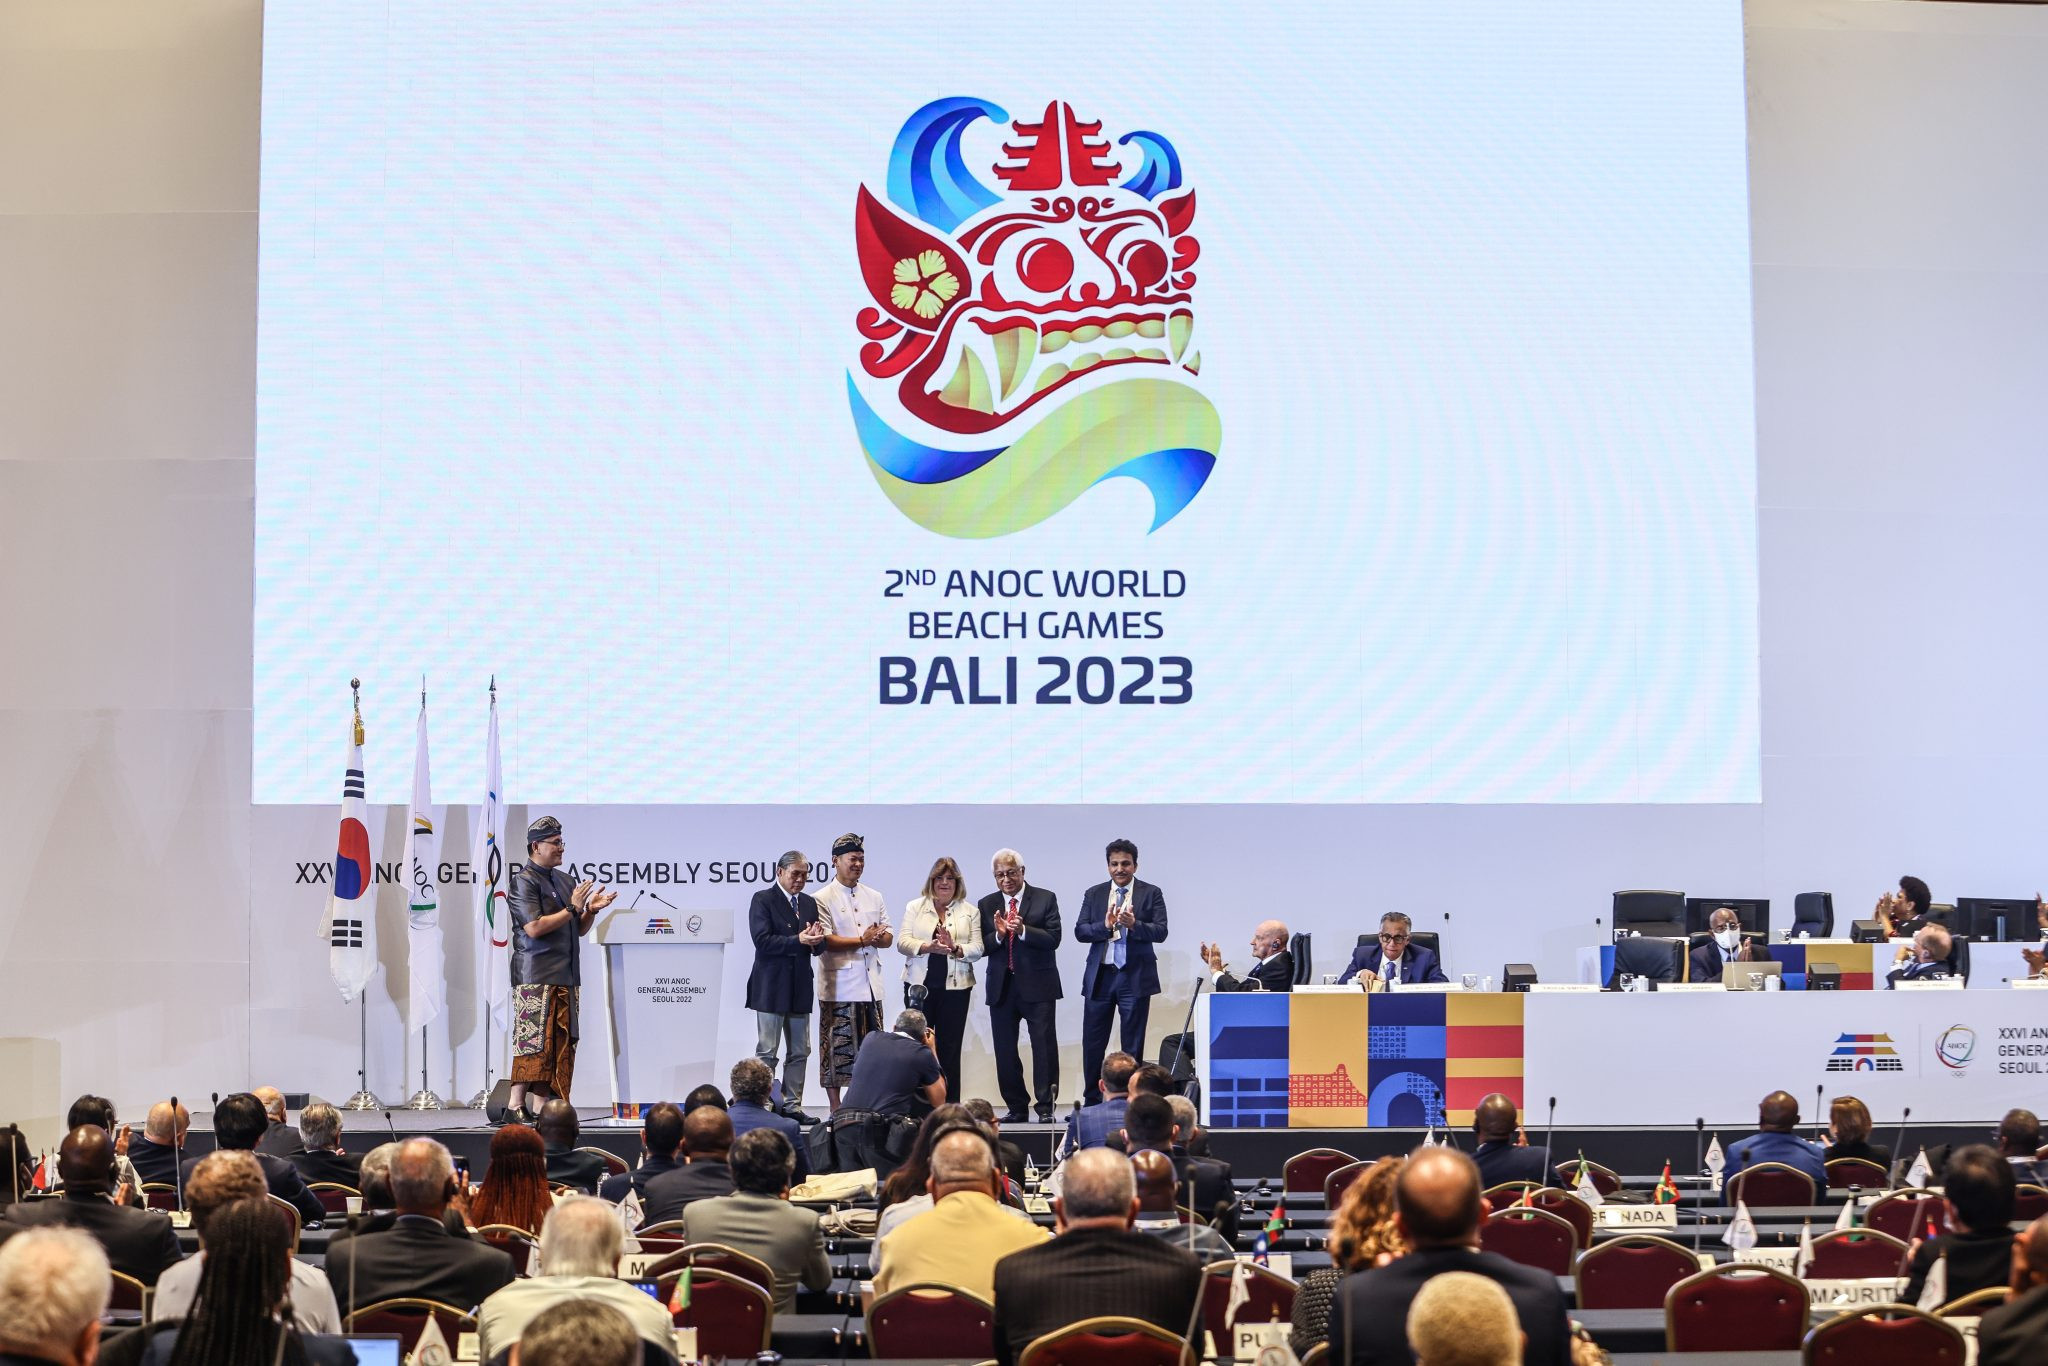 Bali's Governor has expressed objections to Israel's participation at the ANOC World Beach Games ©Getty Images